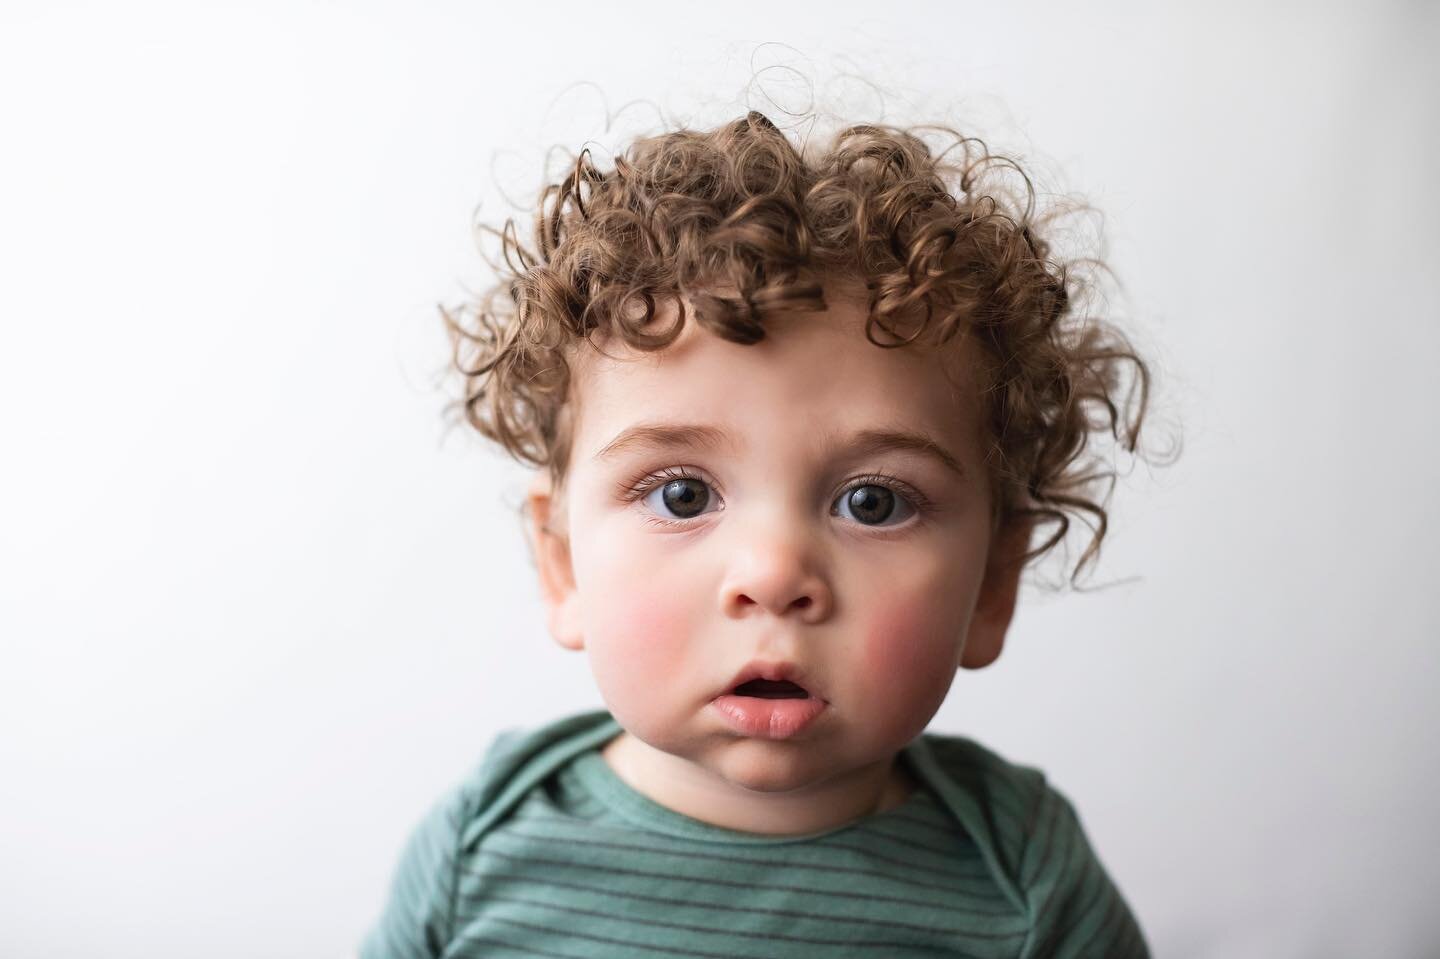 Those curls! 
Tried out a white backdrop today. What do you think? 

#curlycurly 
#supercutekids
#happybaby
#preschoolphotographer 
#childphotographer